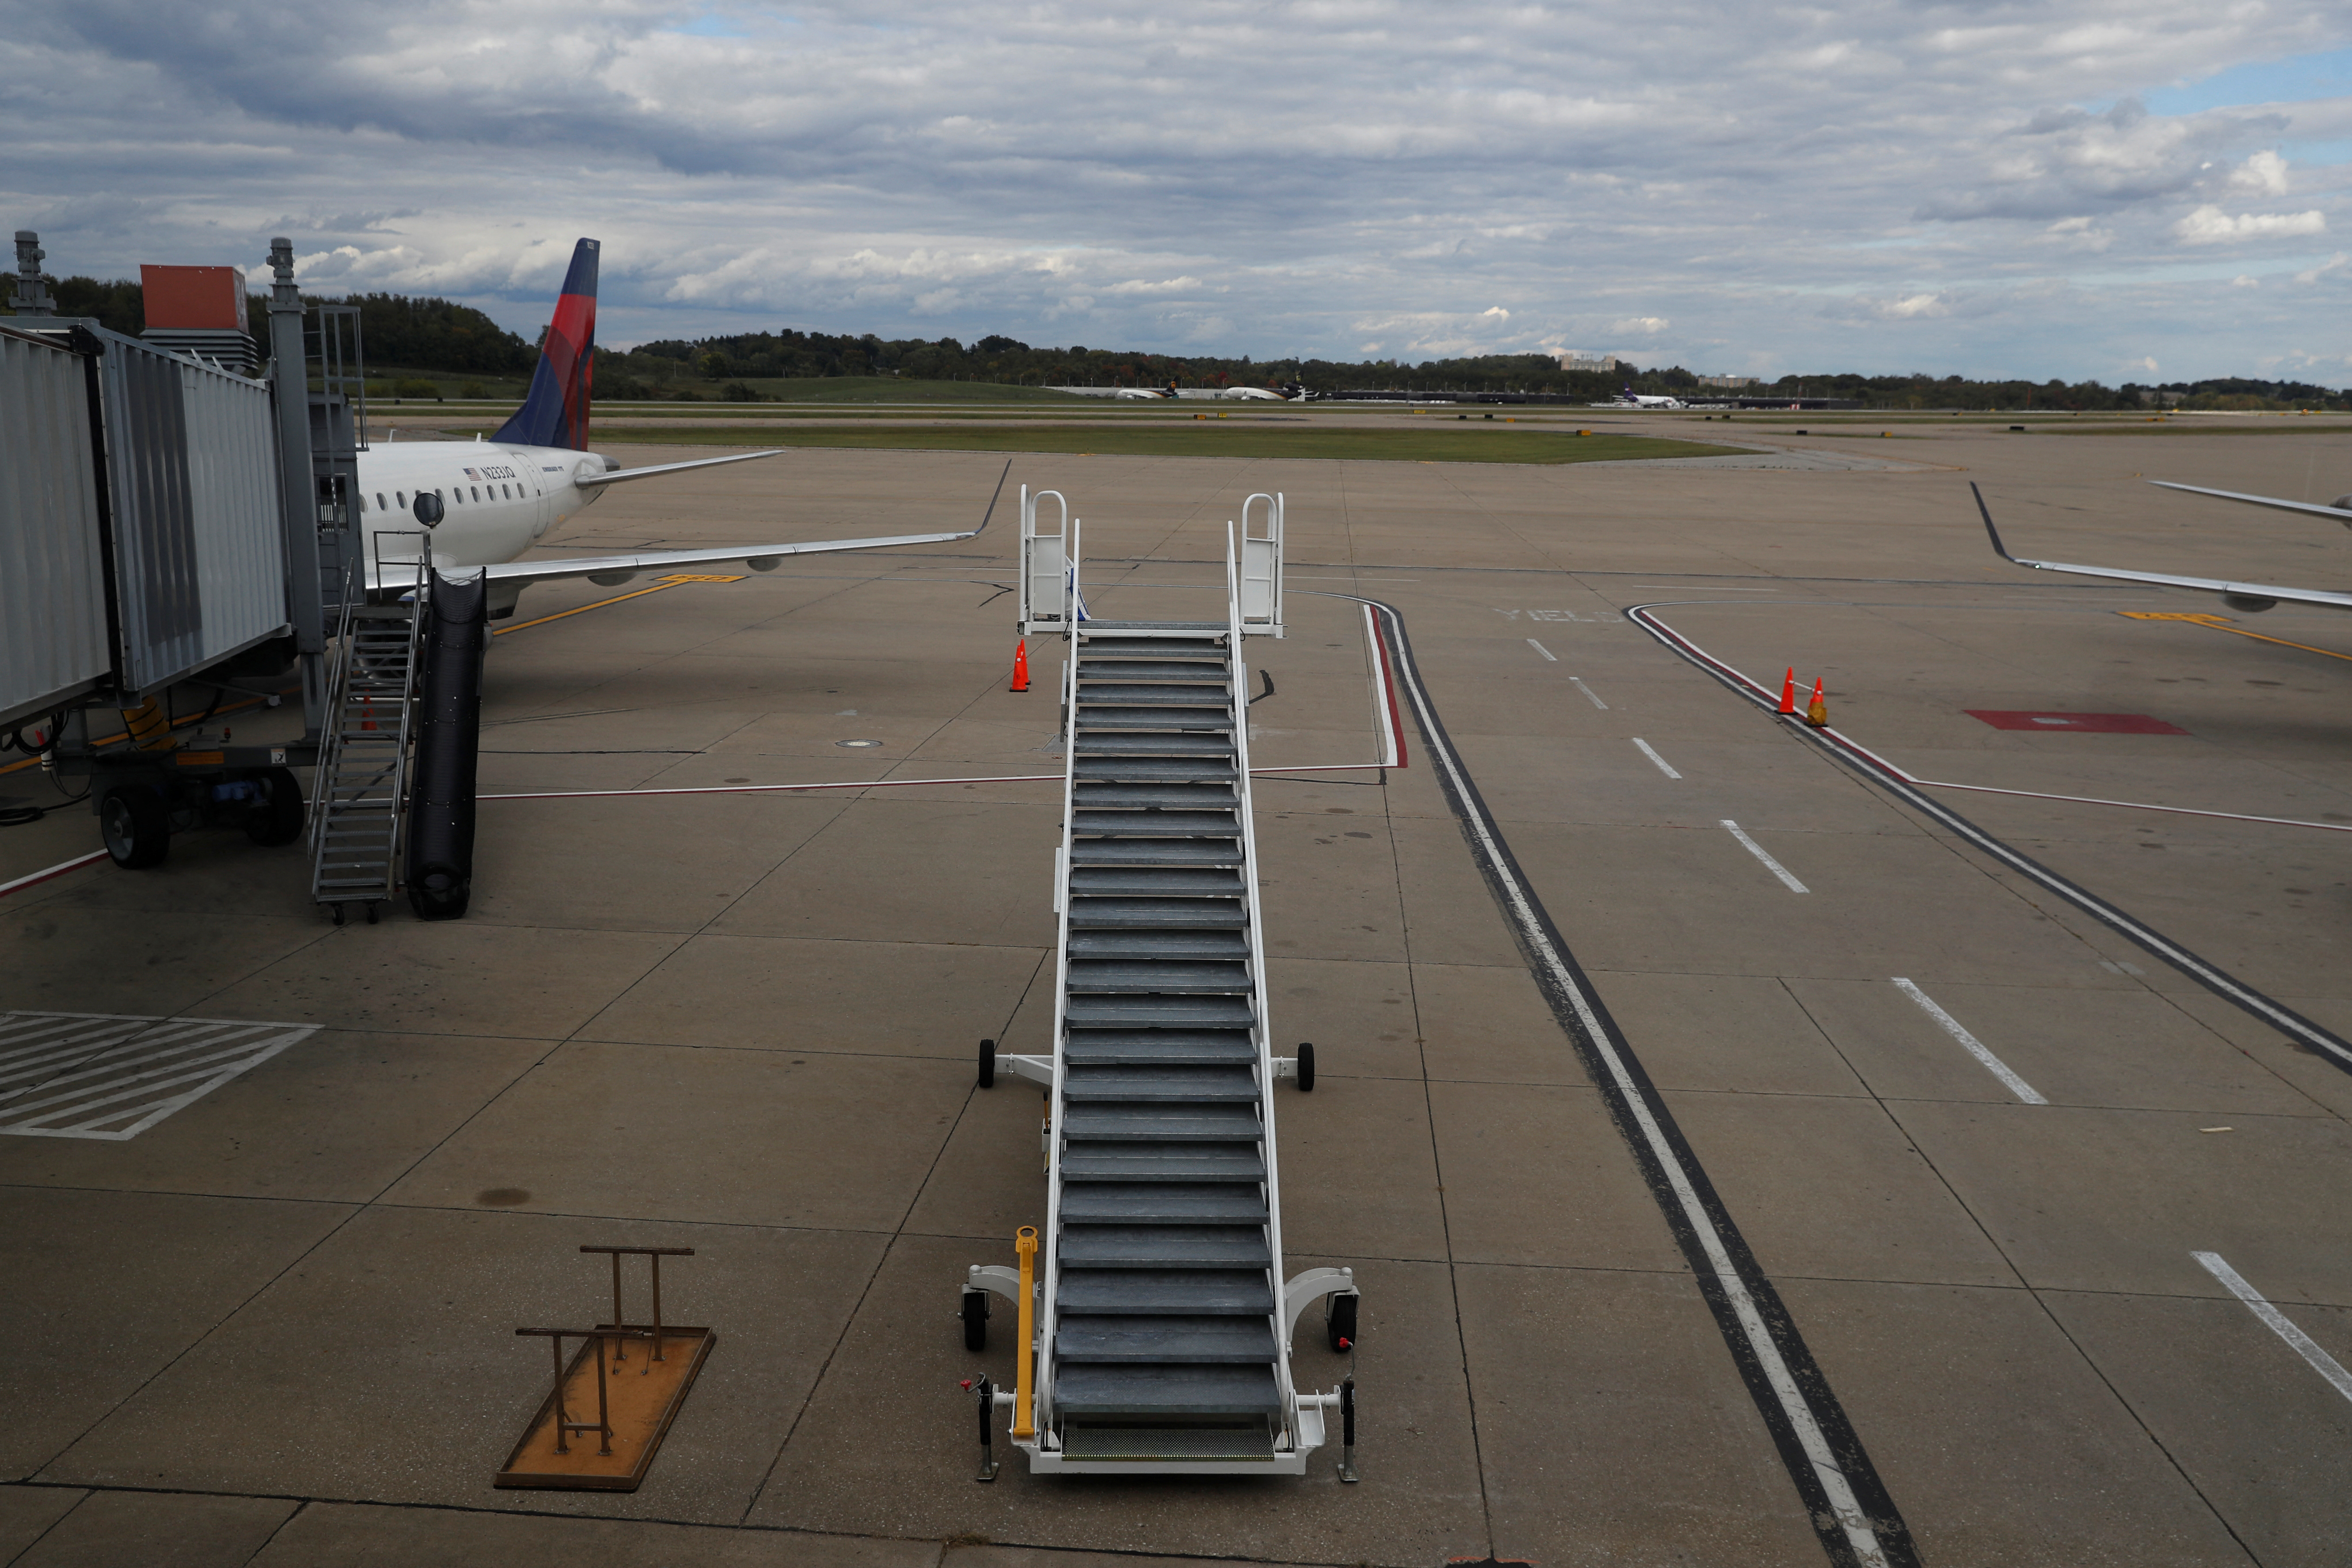 Stairs stand on a tarmac next to a Delta Air Lines plane at Pittsburgh International Airport in Pittsburgh, Pennsylvania